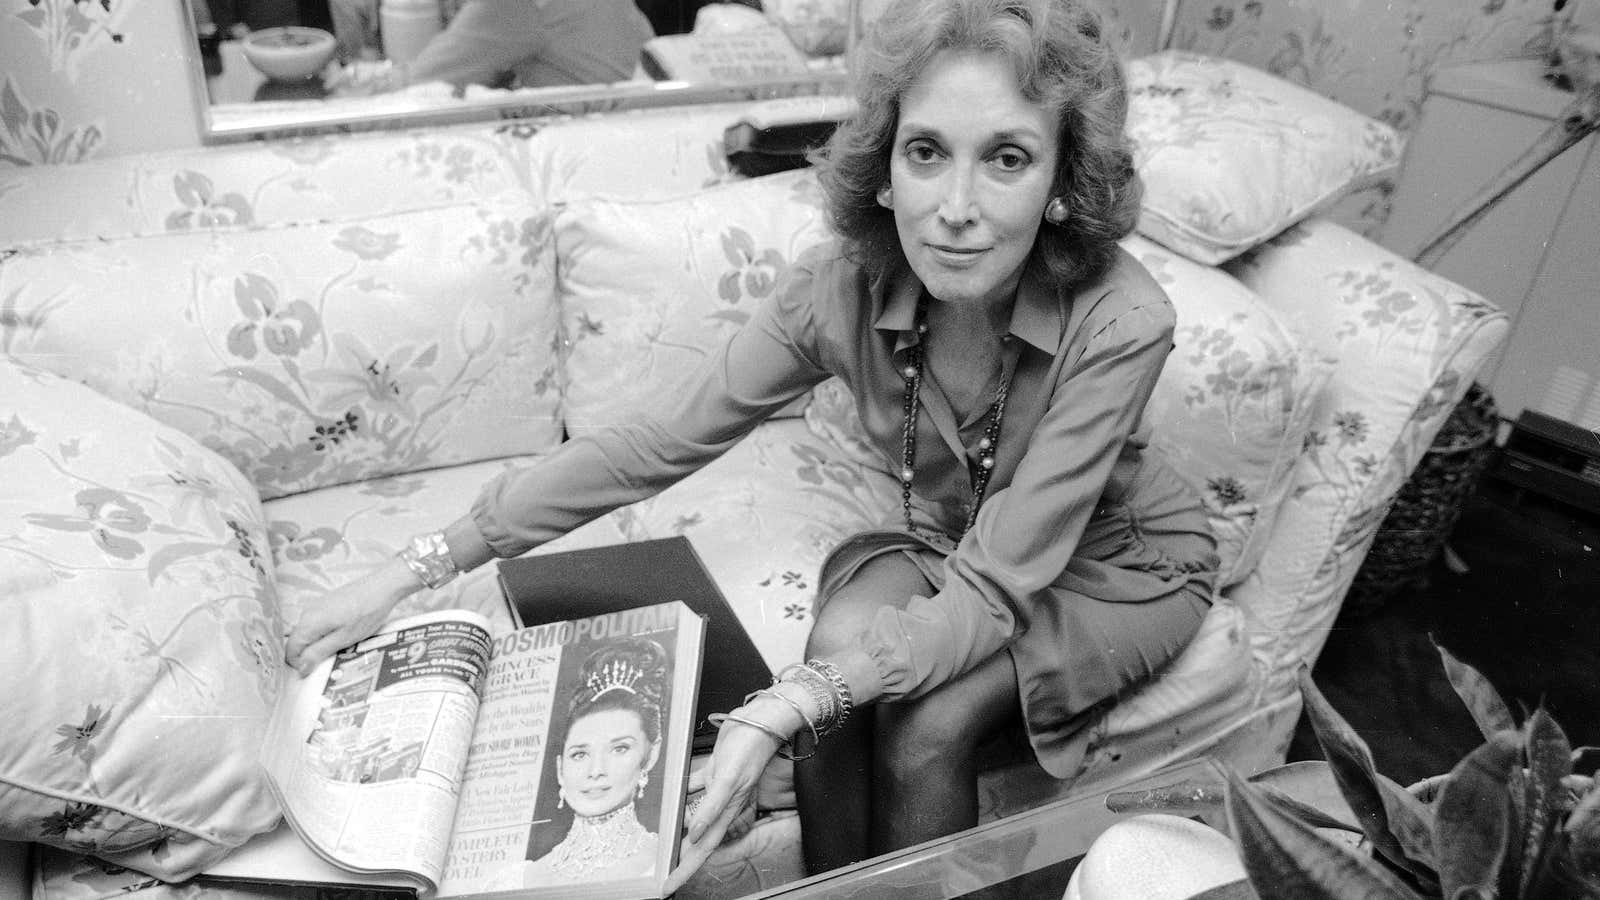 Helen Gurley Brown, editor of Cosmopolitan magazine, poses in her office at 224 W. 57th St. in New York Sept. 19, 1985.